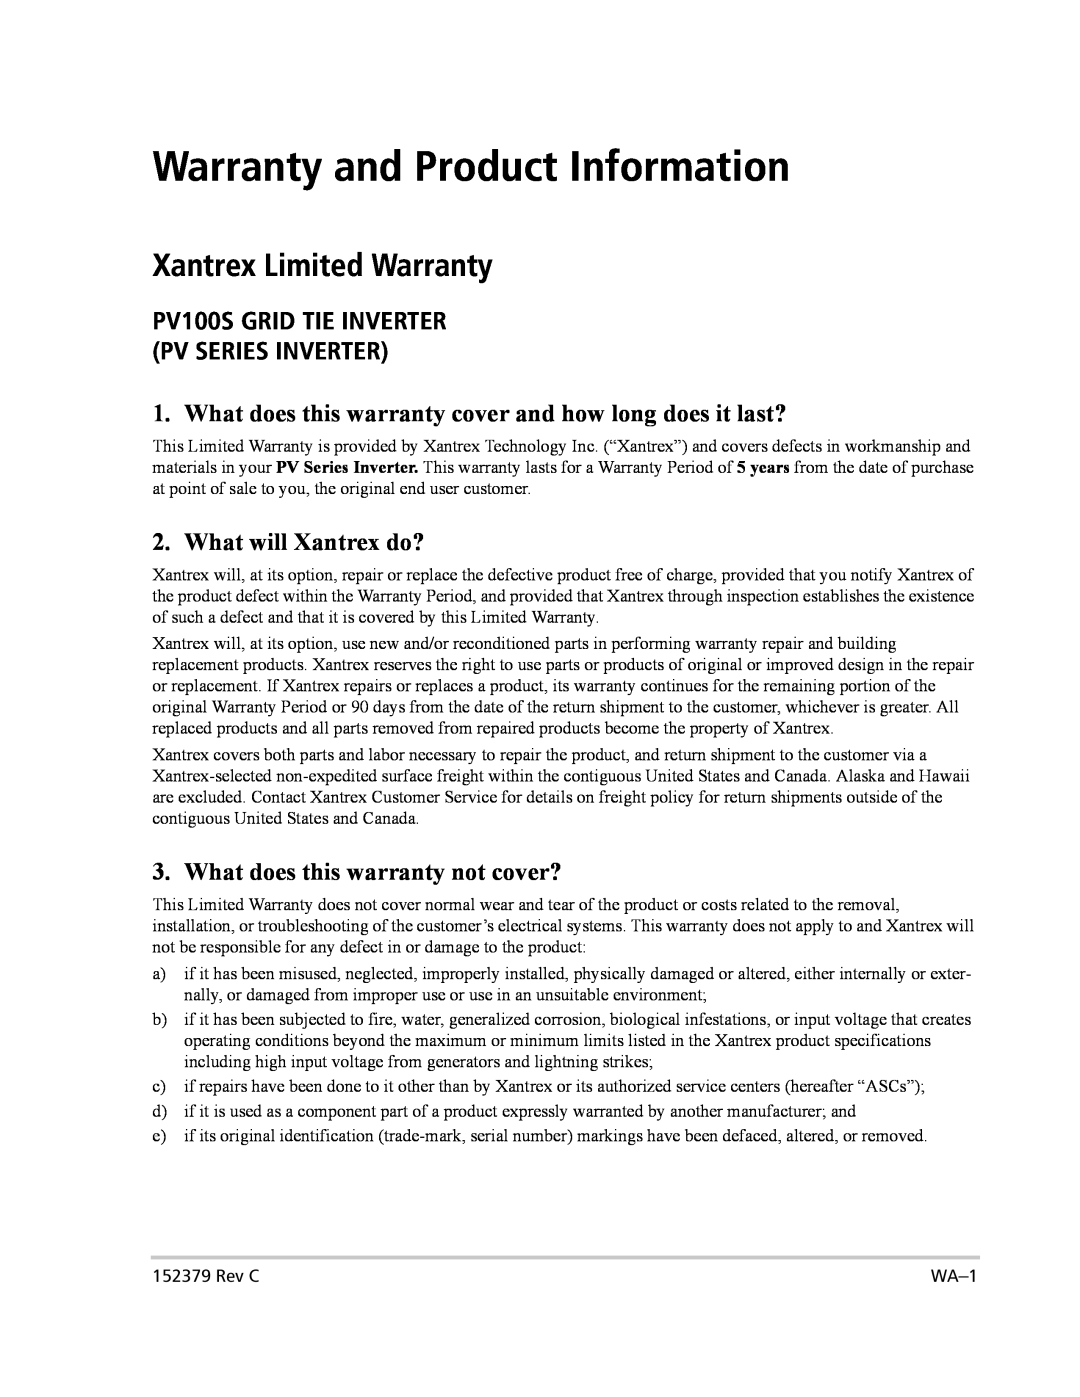 Xantrex Technology PV100S-208 manual Warranty and Product Information, Xantrex Limited Warranty, What will Xantrex do? 